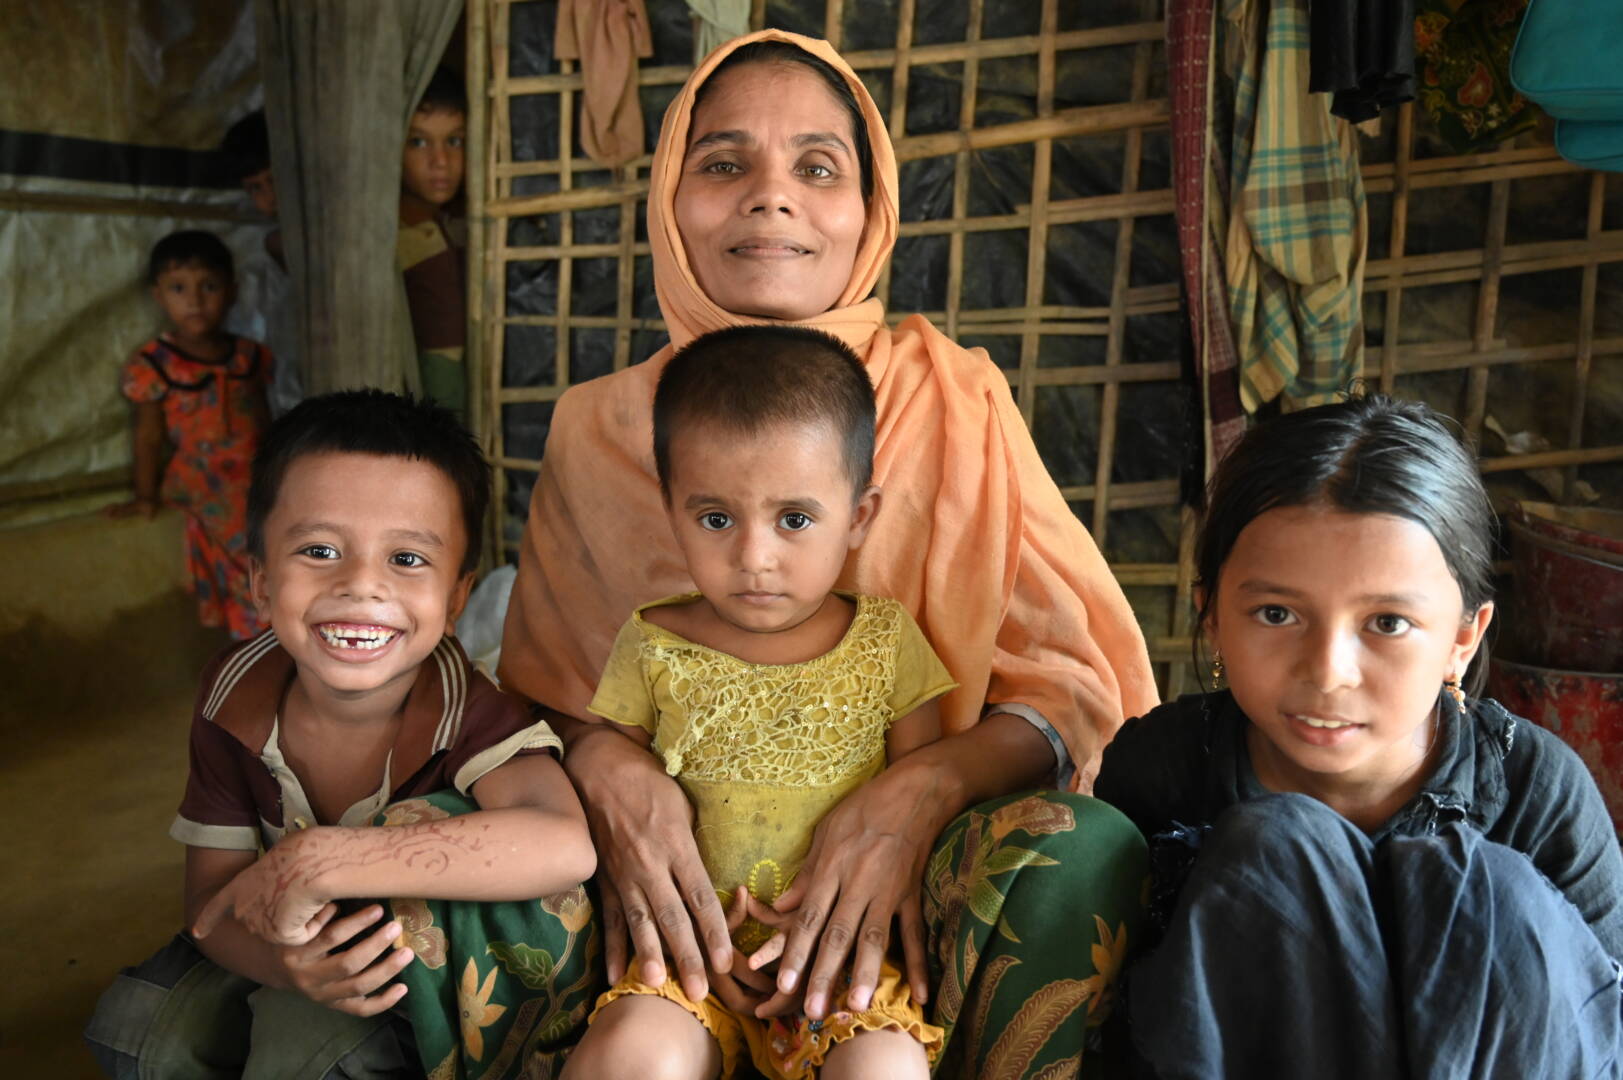 Rohingya refugee families face food insecurity in Bangladesh